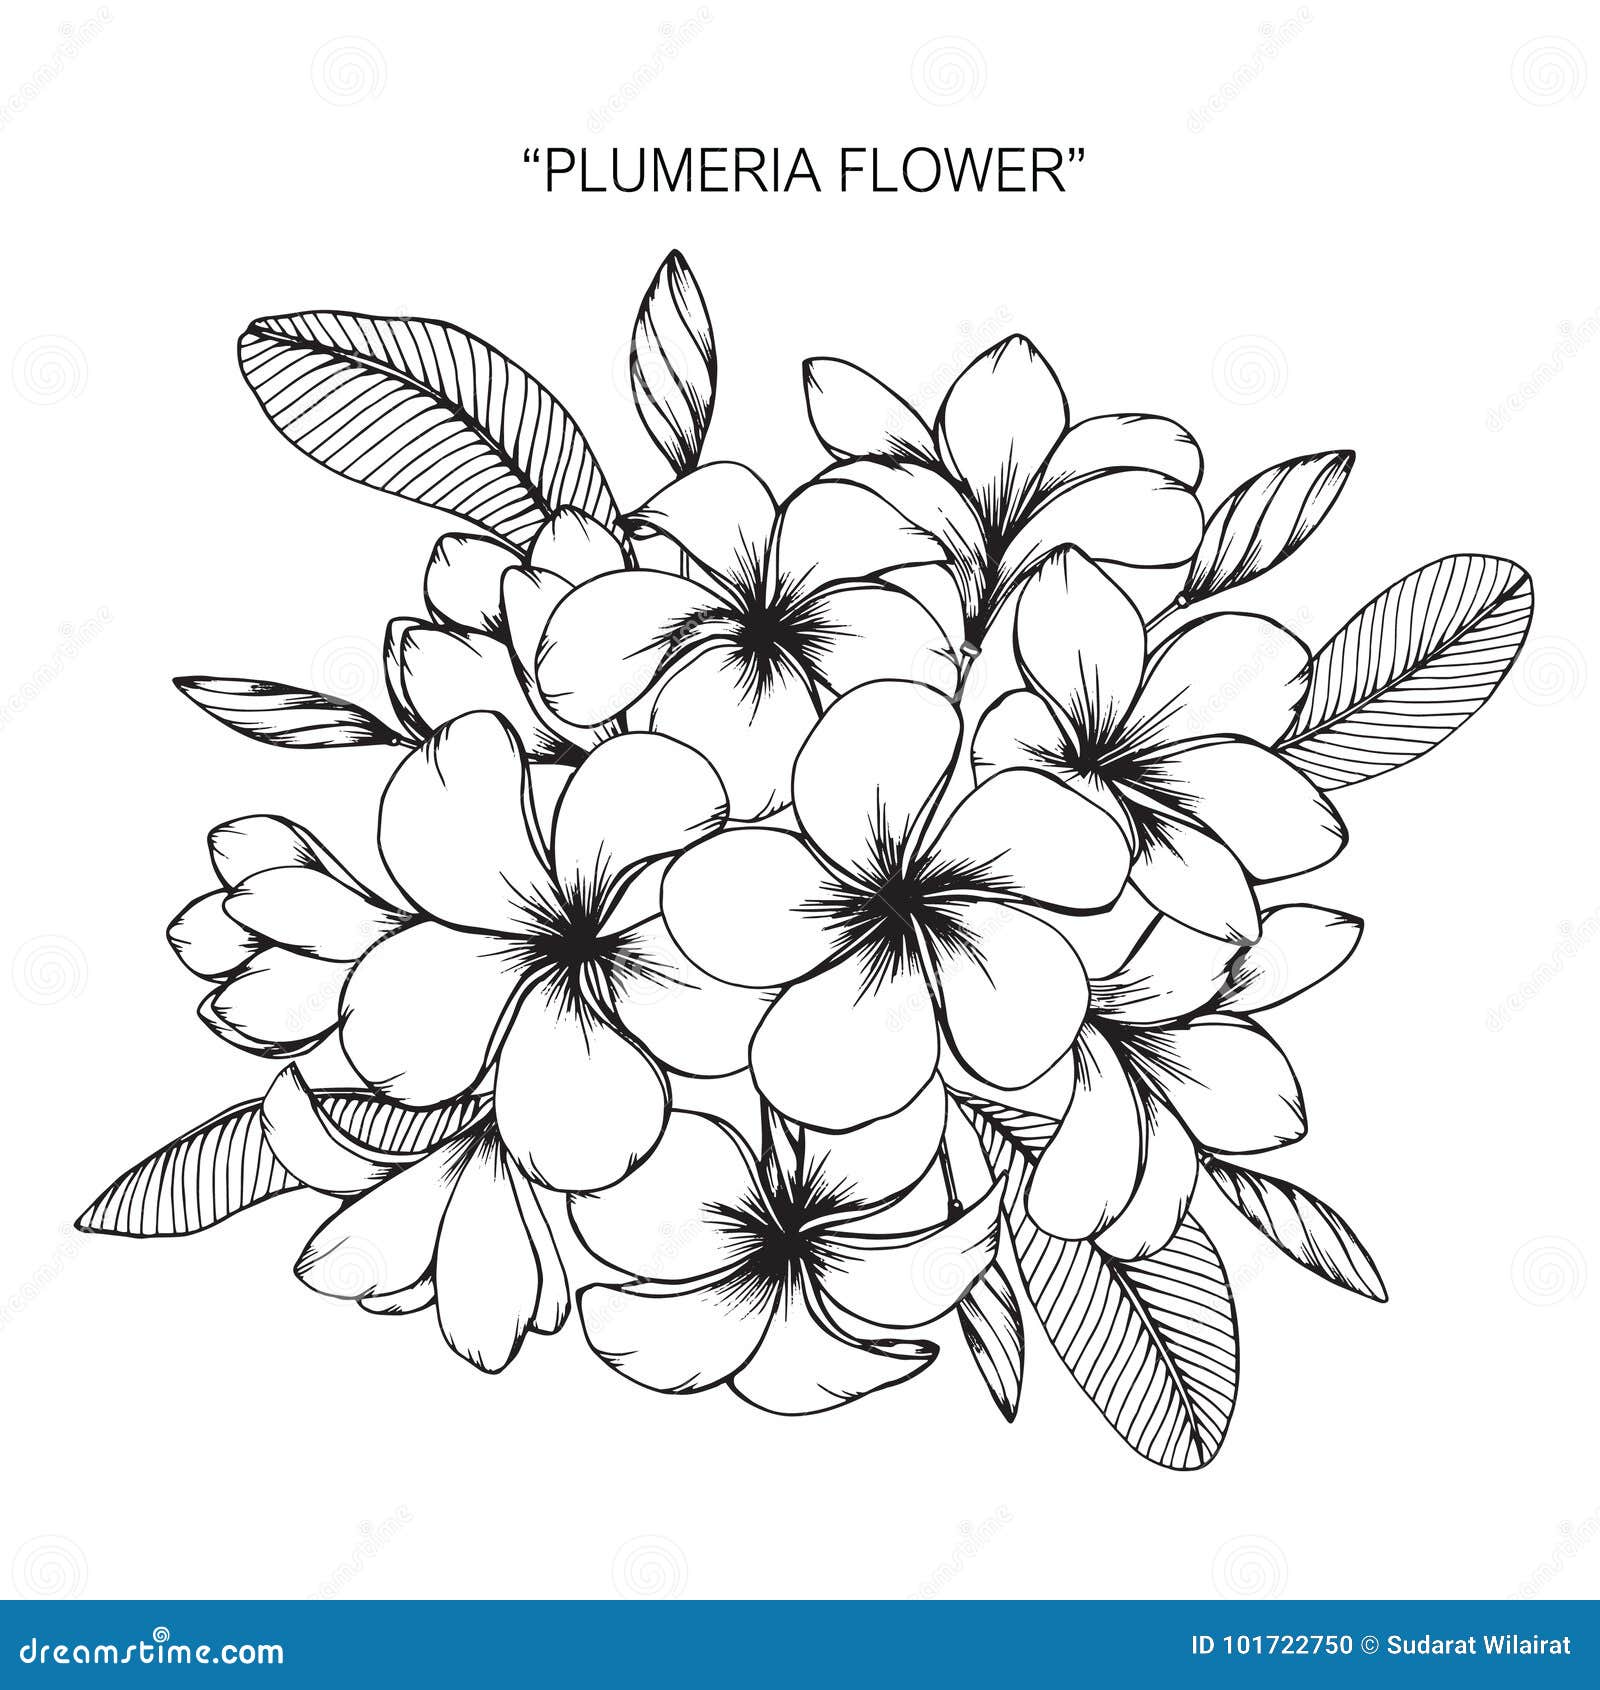 plumeria flower drawing and sketch.